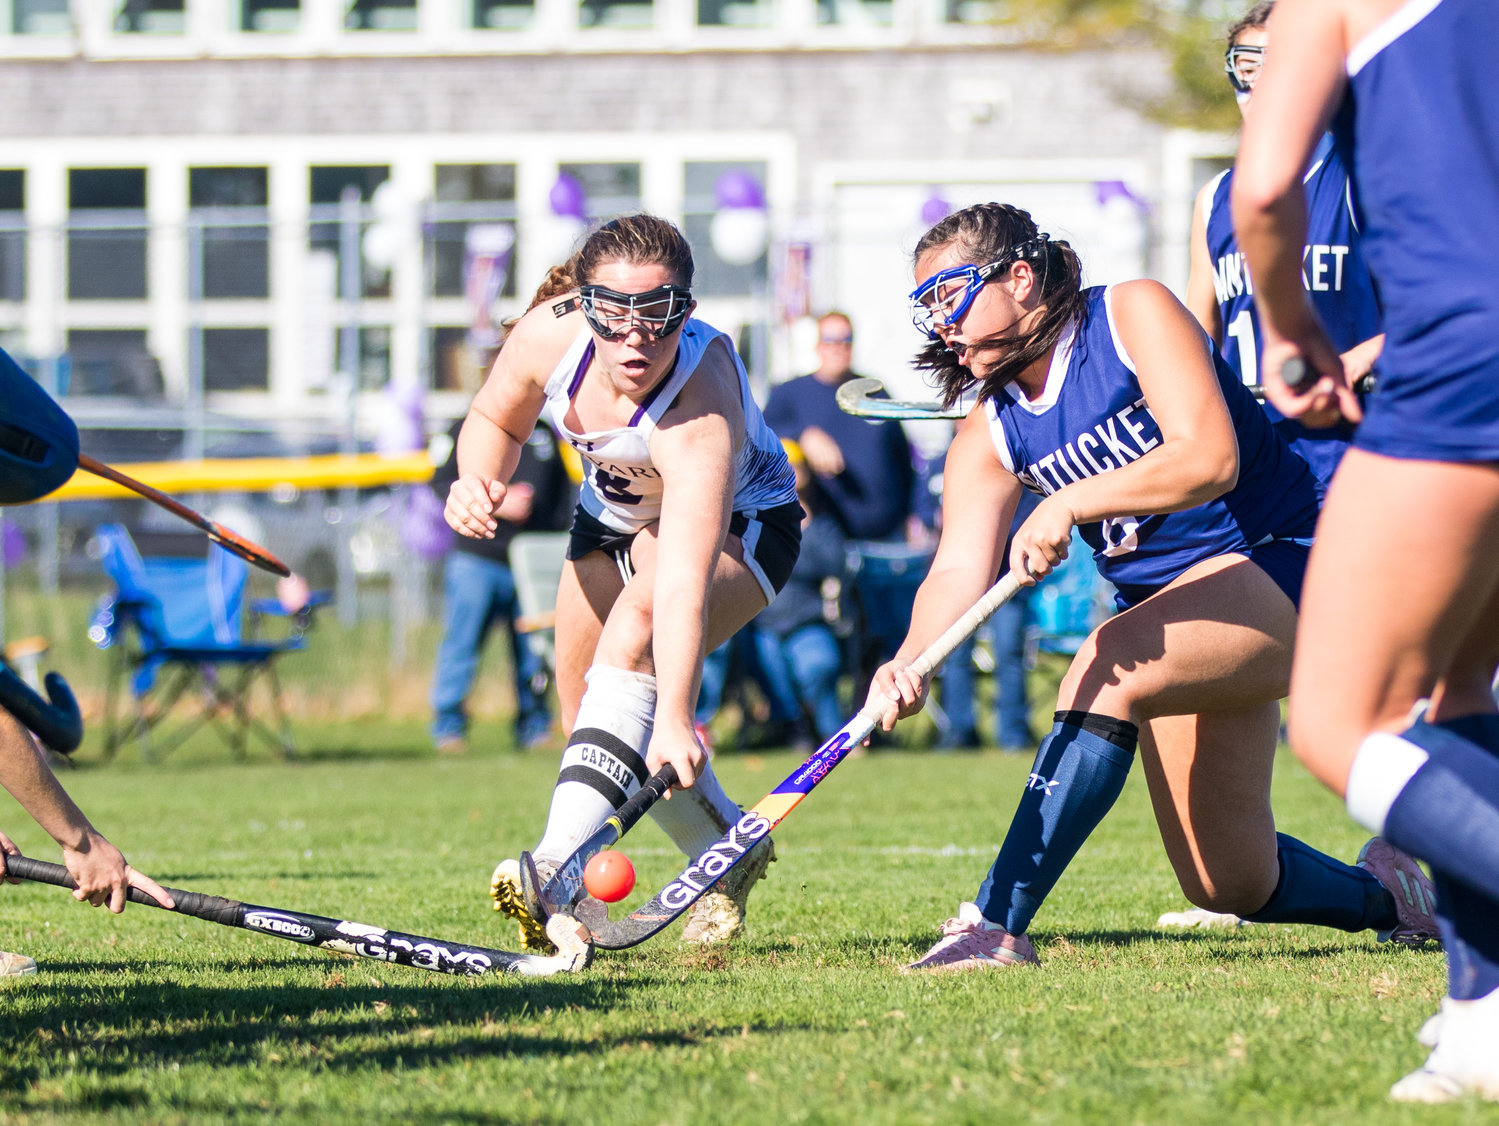 Lily Remick drives a ball through the Vineyard defense Saturday. The teams tied 1-1.